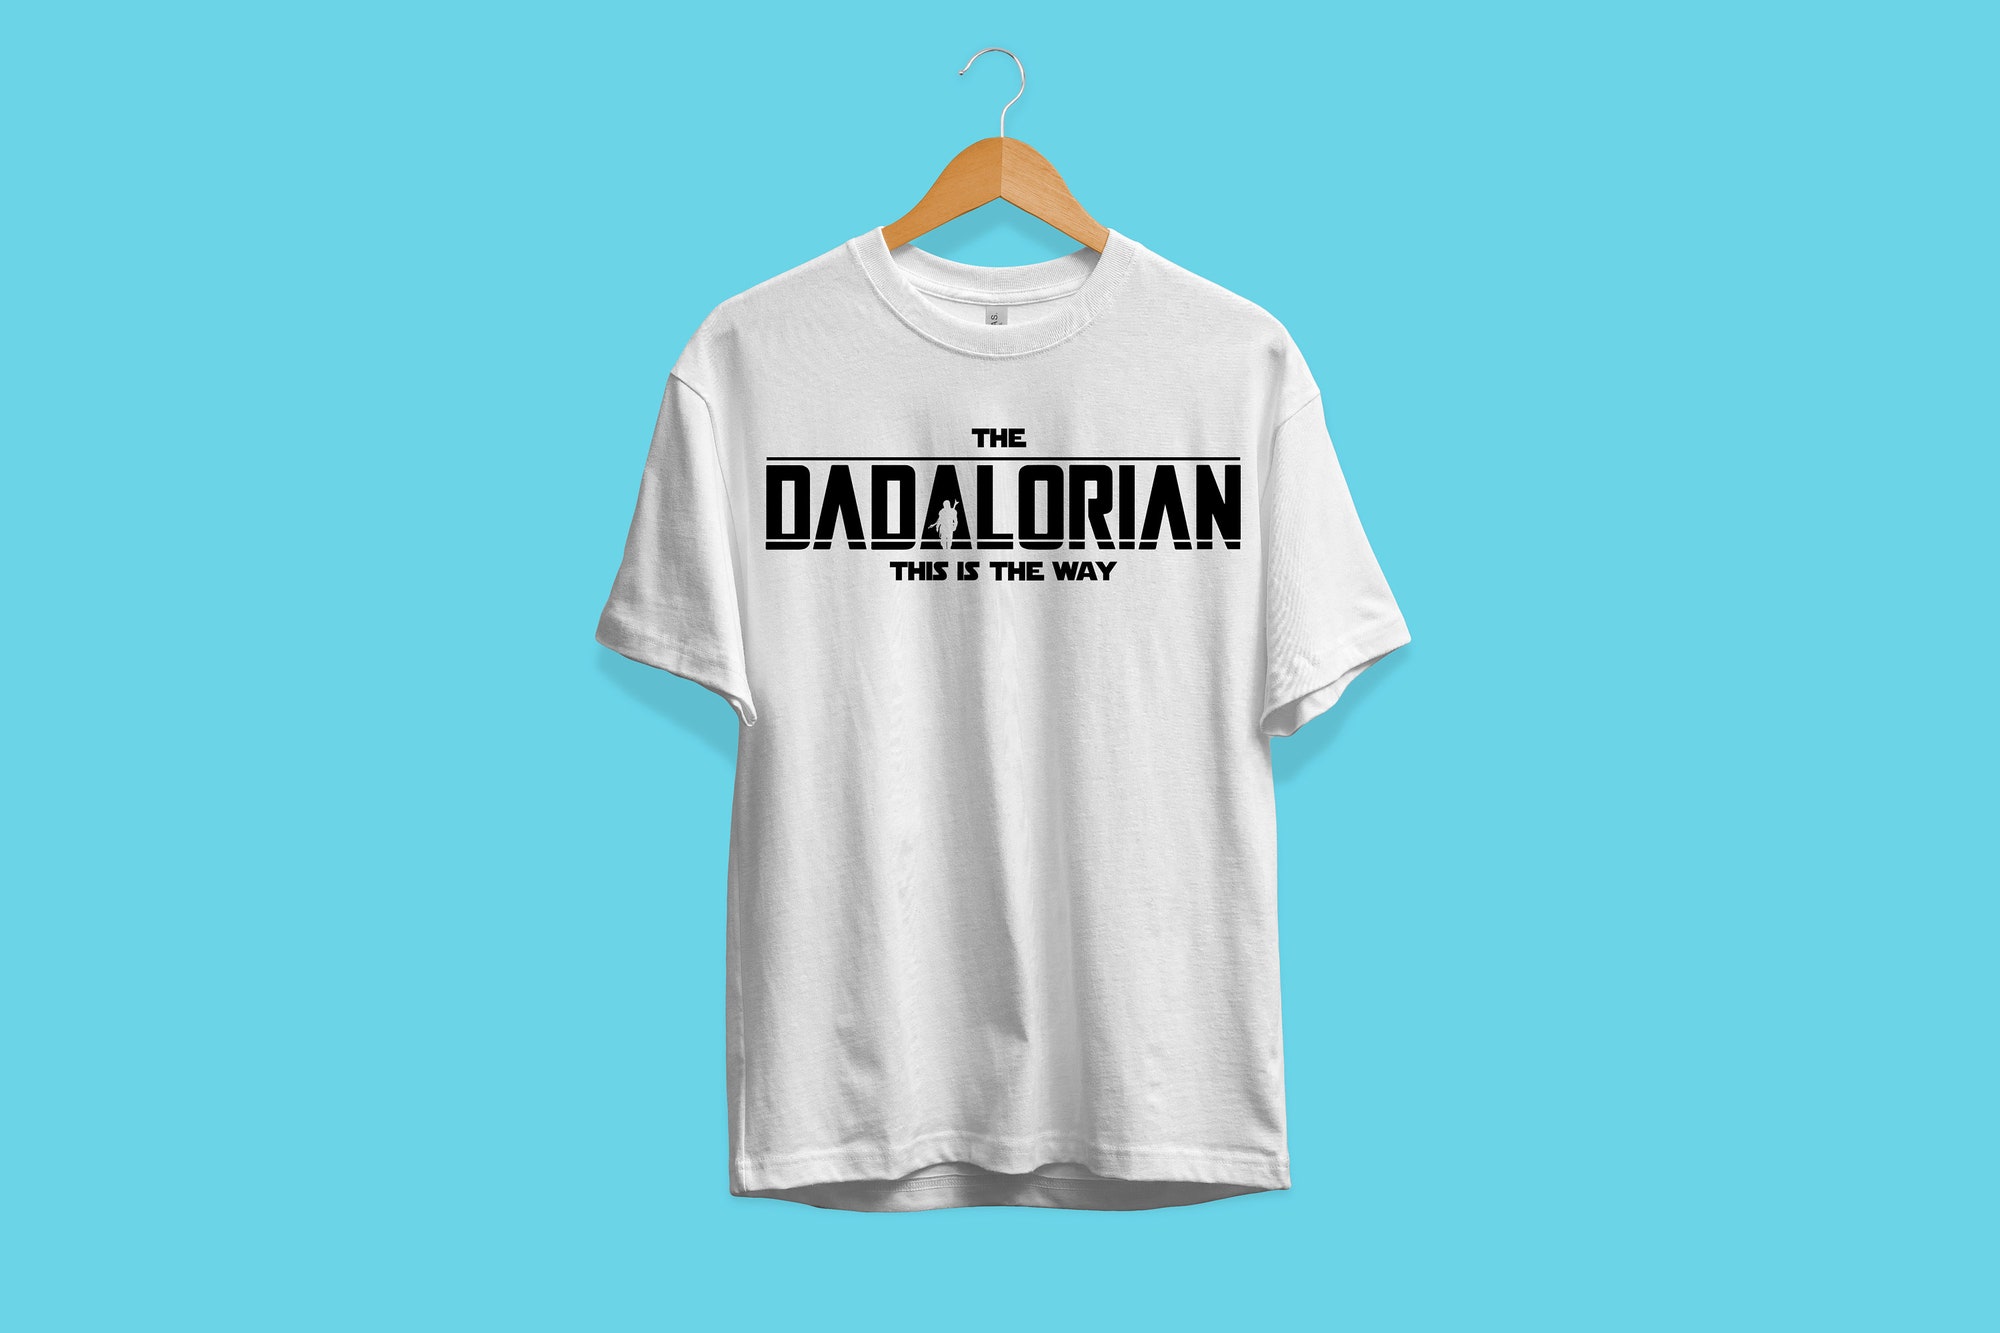 Discover The Dadalorian - Fathers day T-shirt - Inspired by The Madalorian